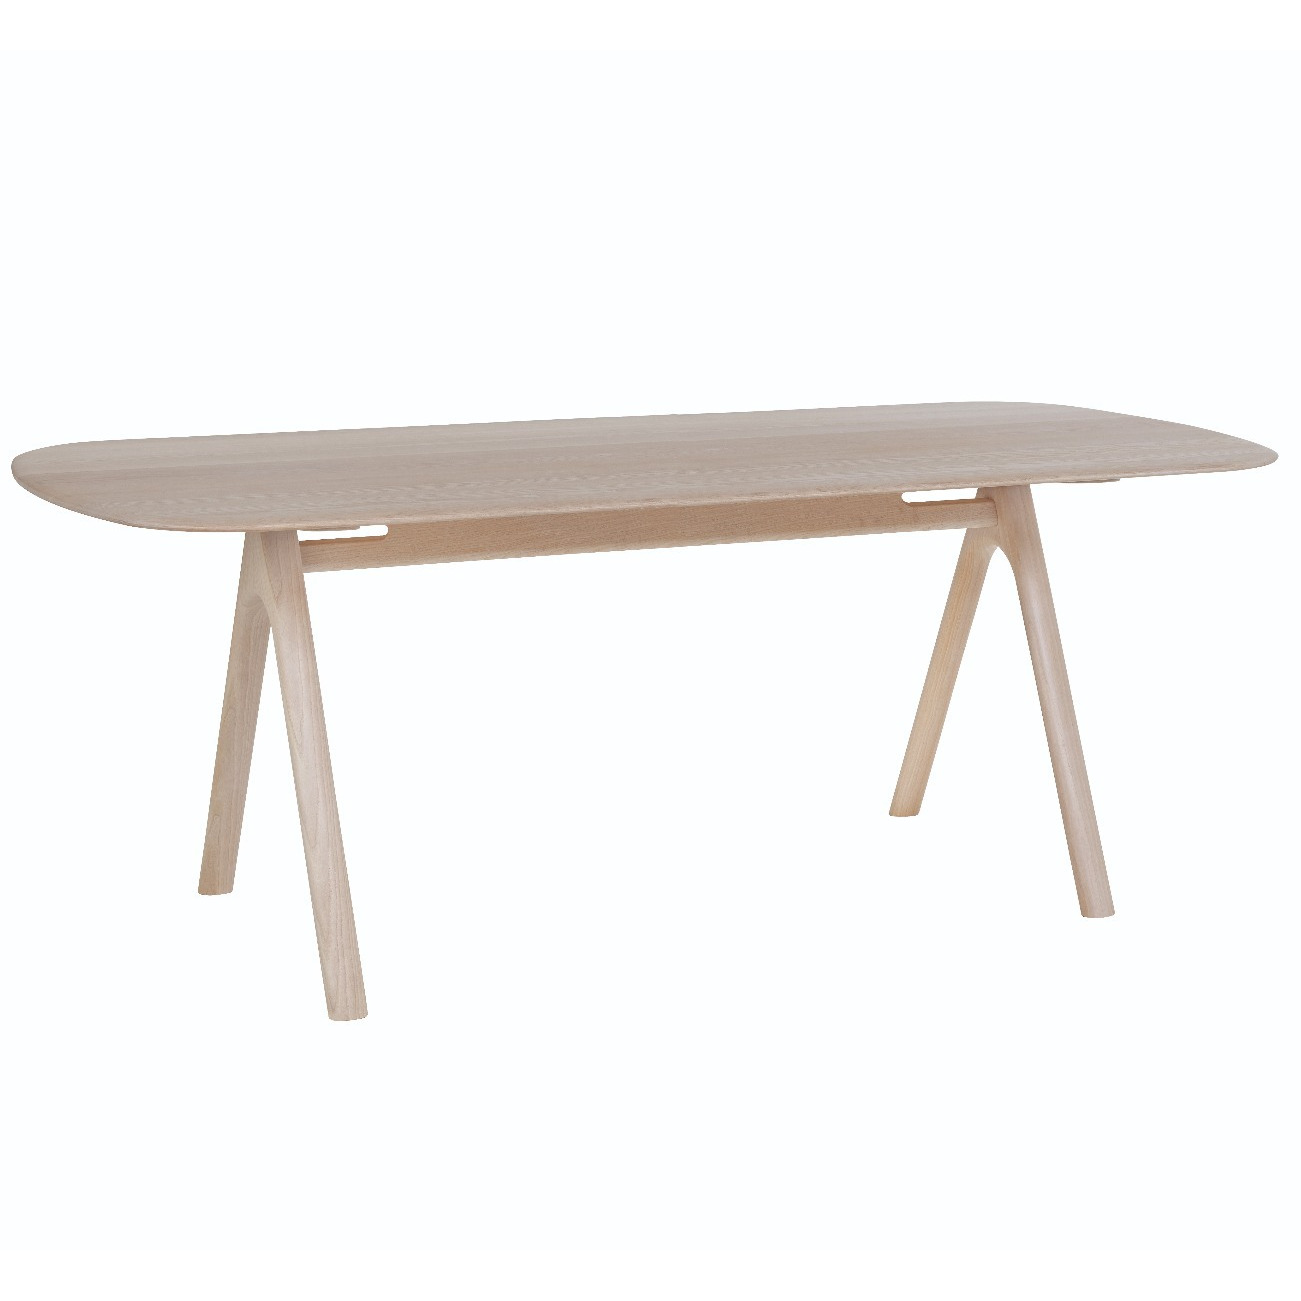 Ercol Corso Large Dining Table, Neutral Wood - Barker & Stonehouse - image 1